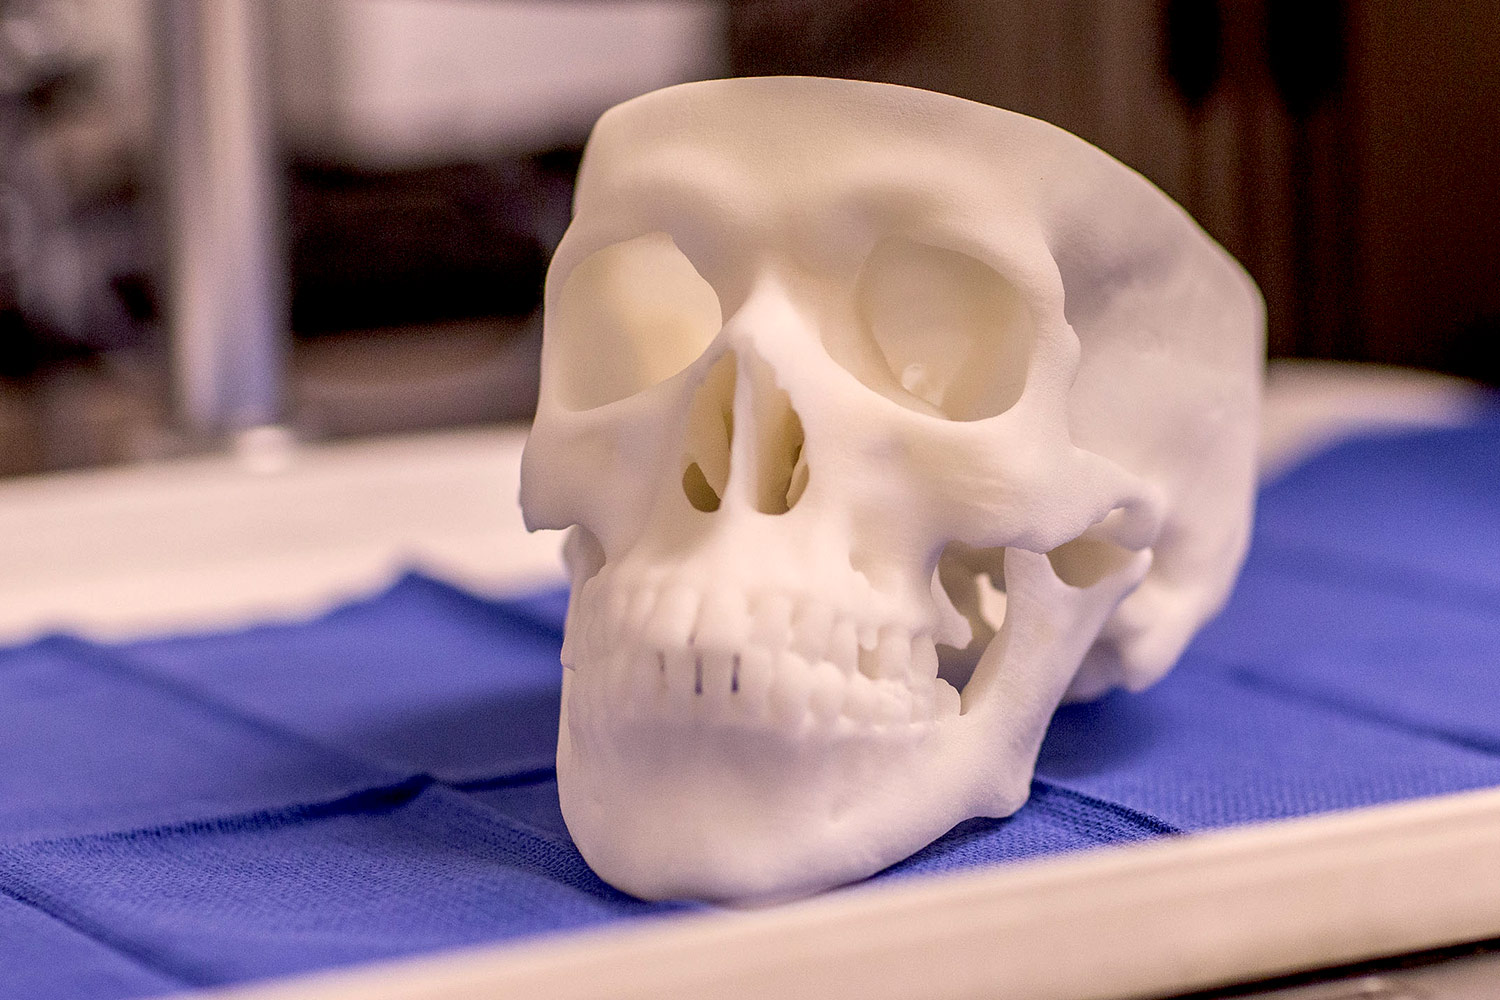 Patient CT or MRI scans are converted to 3-D printable files to create the 3-D printed skull models.